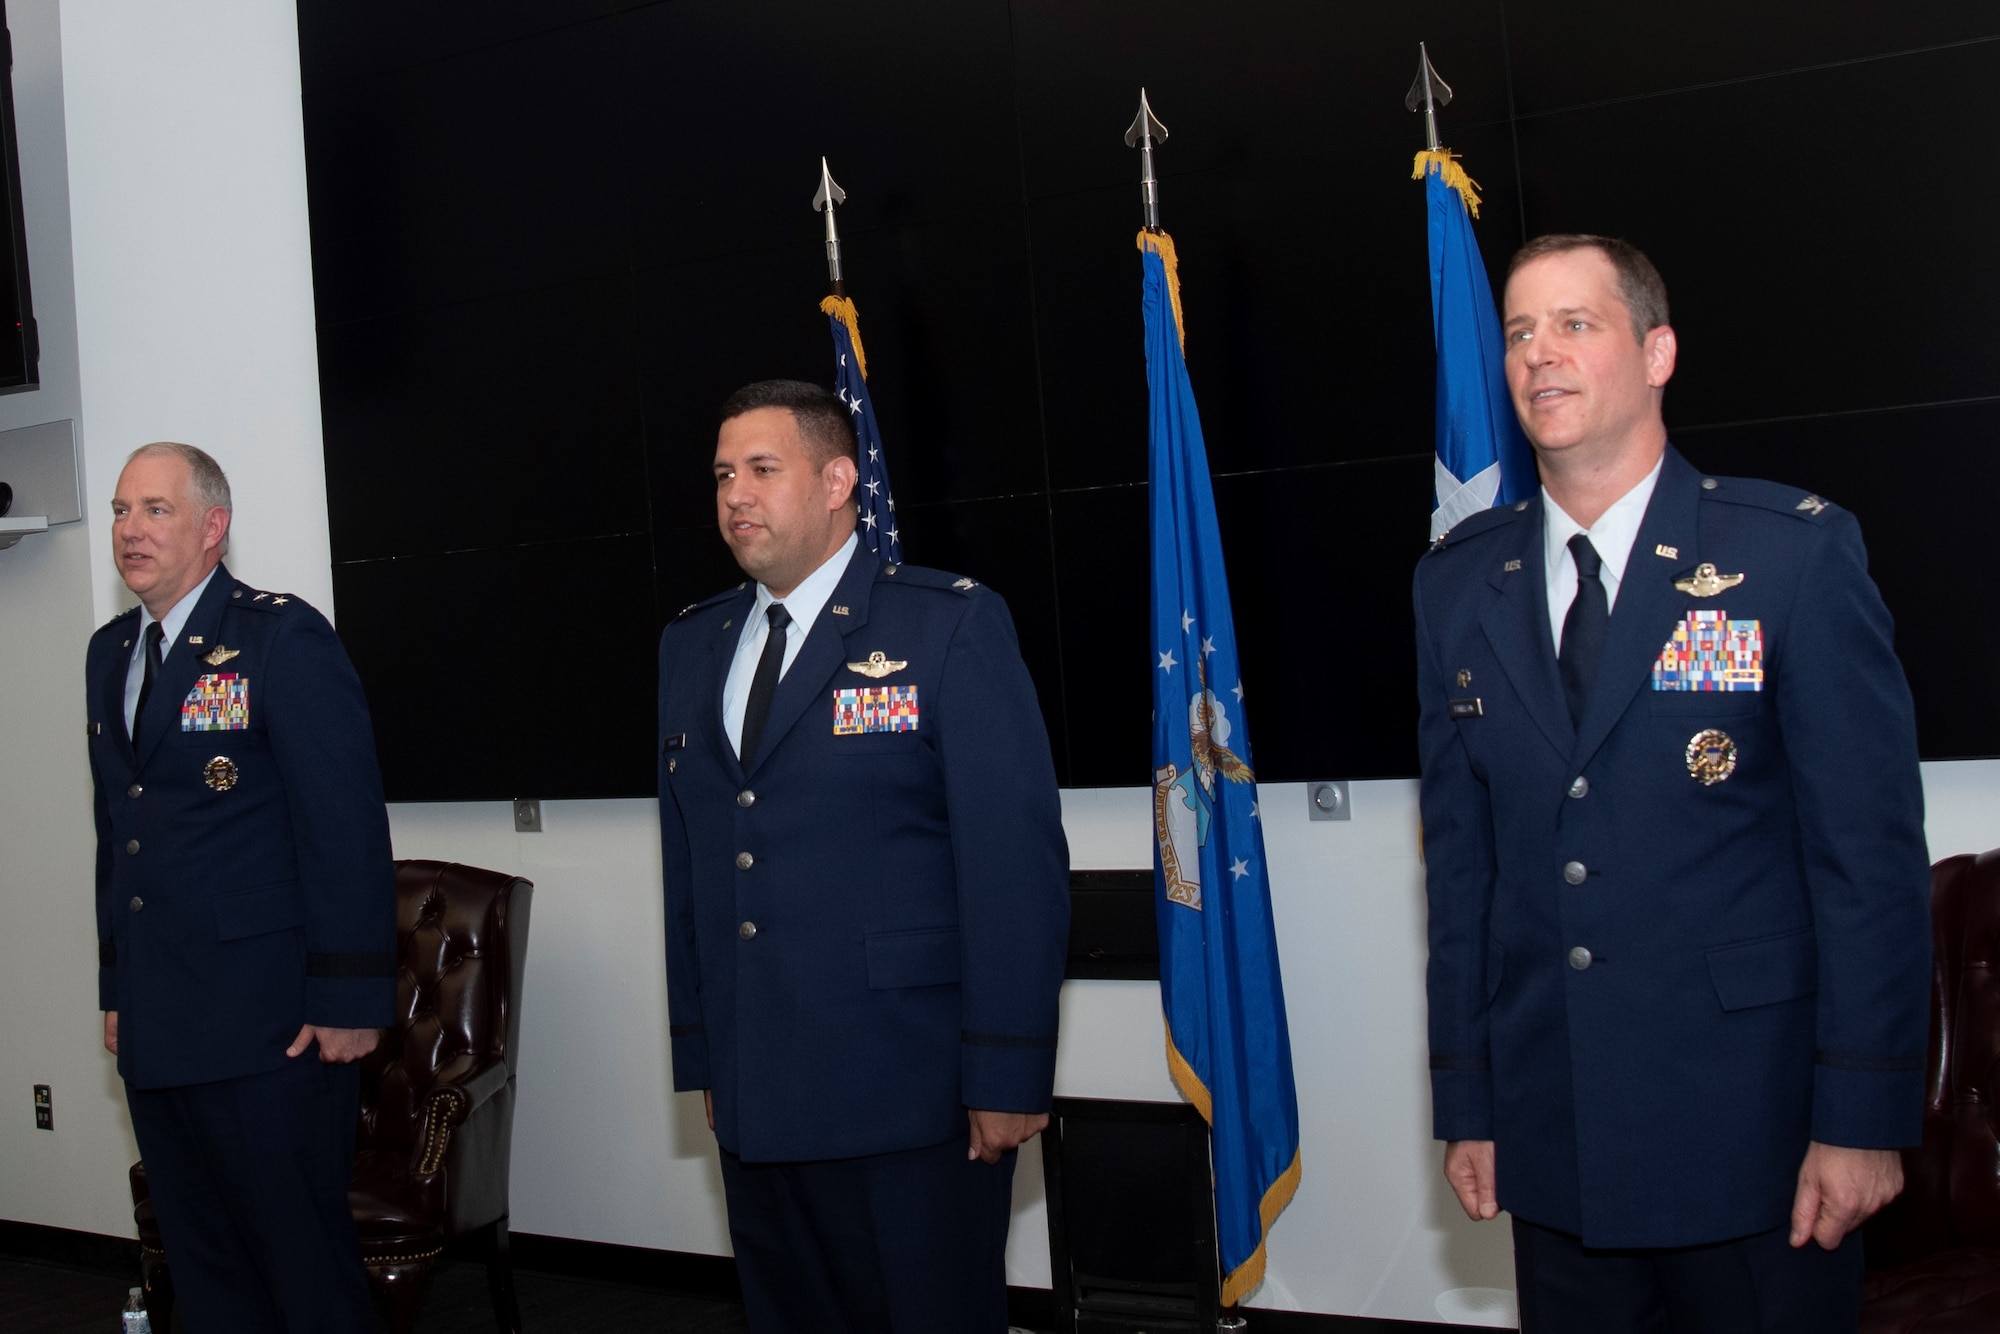 Maj. Gen. John R. Gordy (left), commander of the U.S. Air Force Expeditionary Center at Joint Base McGuire-Dix-Lakehurst, N.J., presided over the change of command ceremony on June 15 when Col. Joseph "Jacko" M. Vanoni (center) assumed command of the 43d Air Mobility Operations Group from Col. Timothy S. Danielson (right)